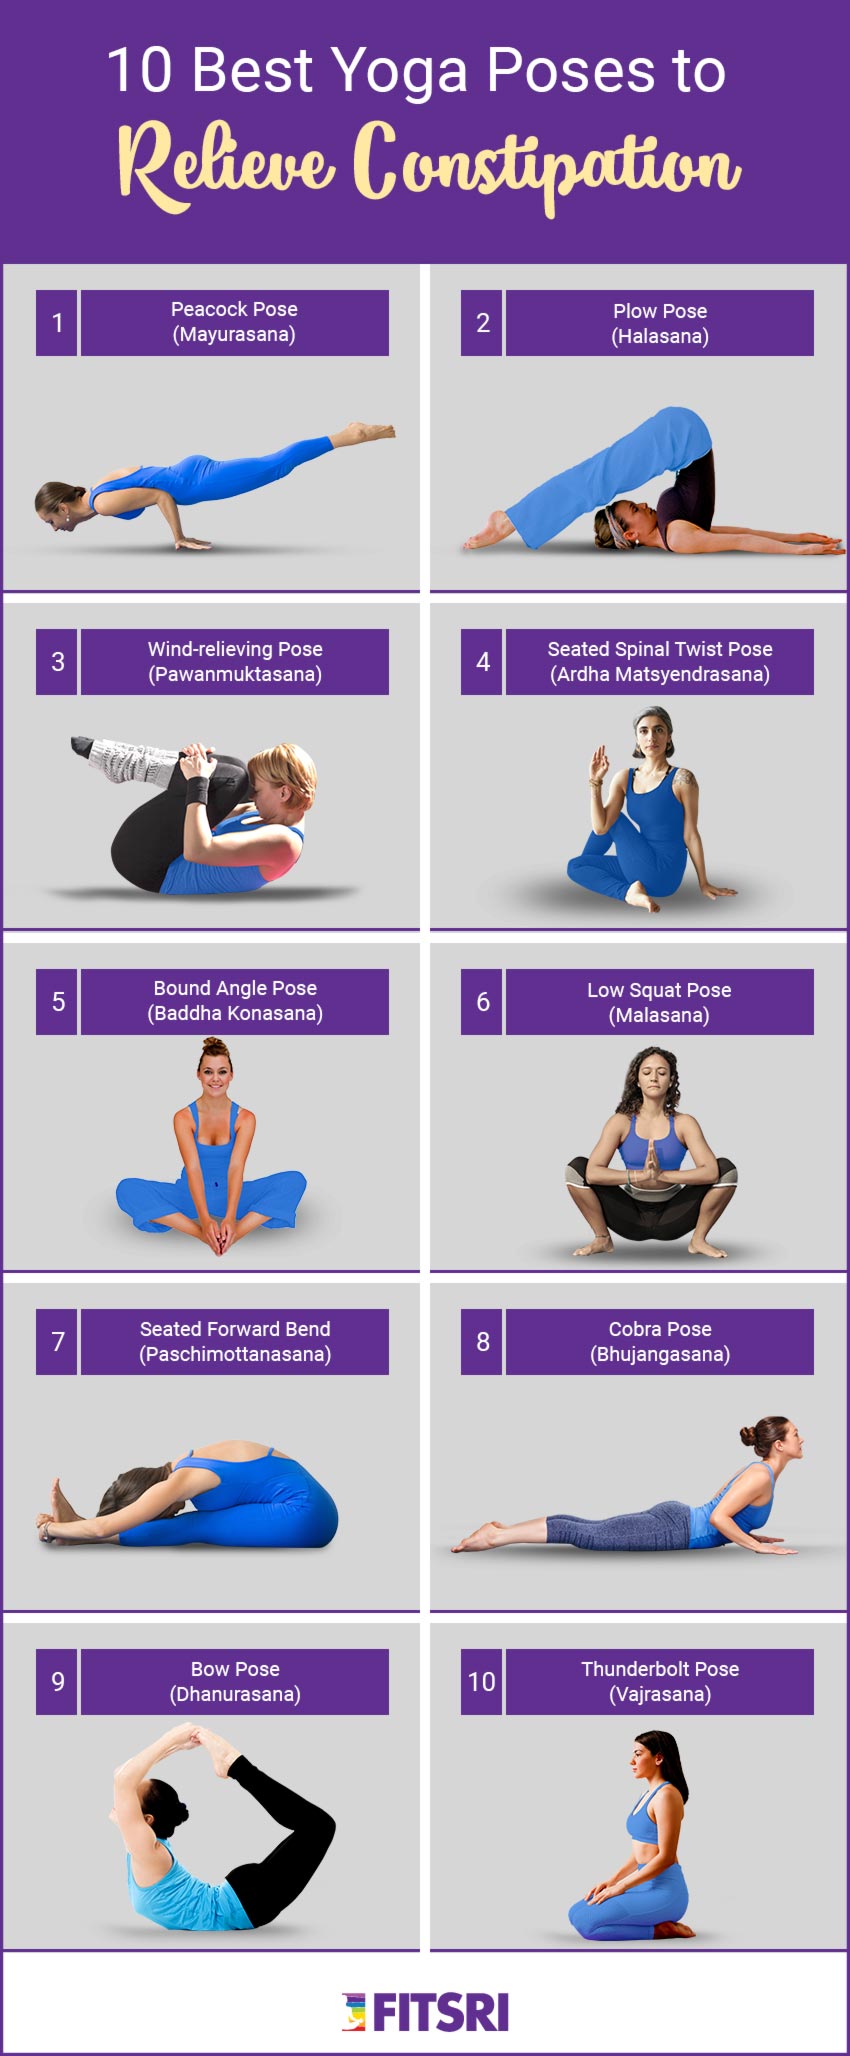 Warm up yoga postures to help you straddle split - Times of India